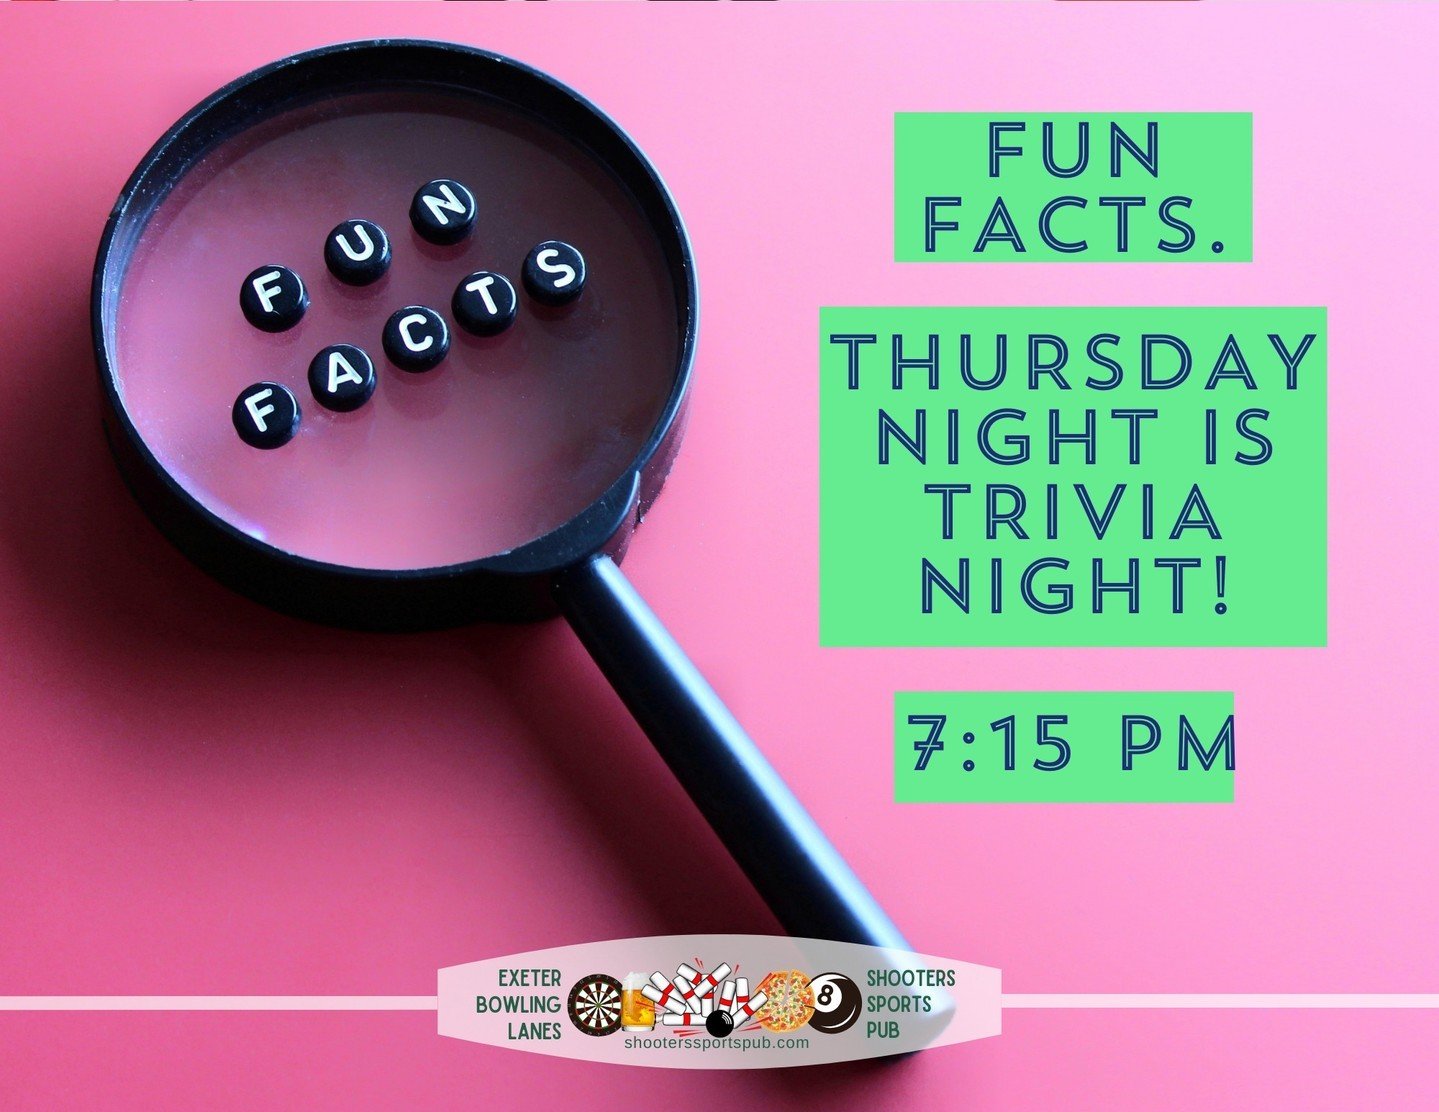 Think you've got game? Test your wits at Trivia Night every Thursday at 7:15 pm! 🧠🎉 Come on down for a brew and brain-busters with the crew! #TriviaThrowdown